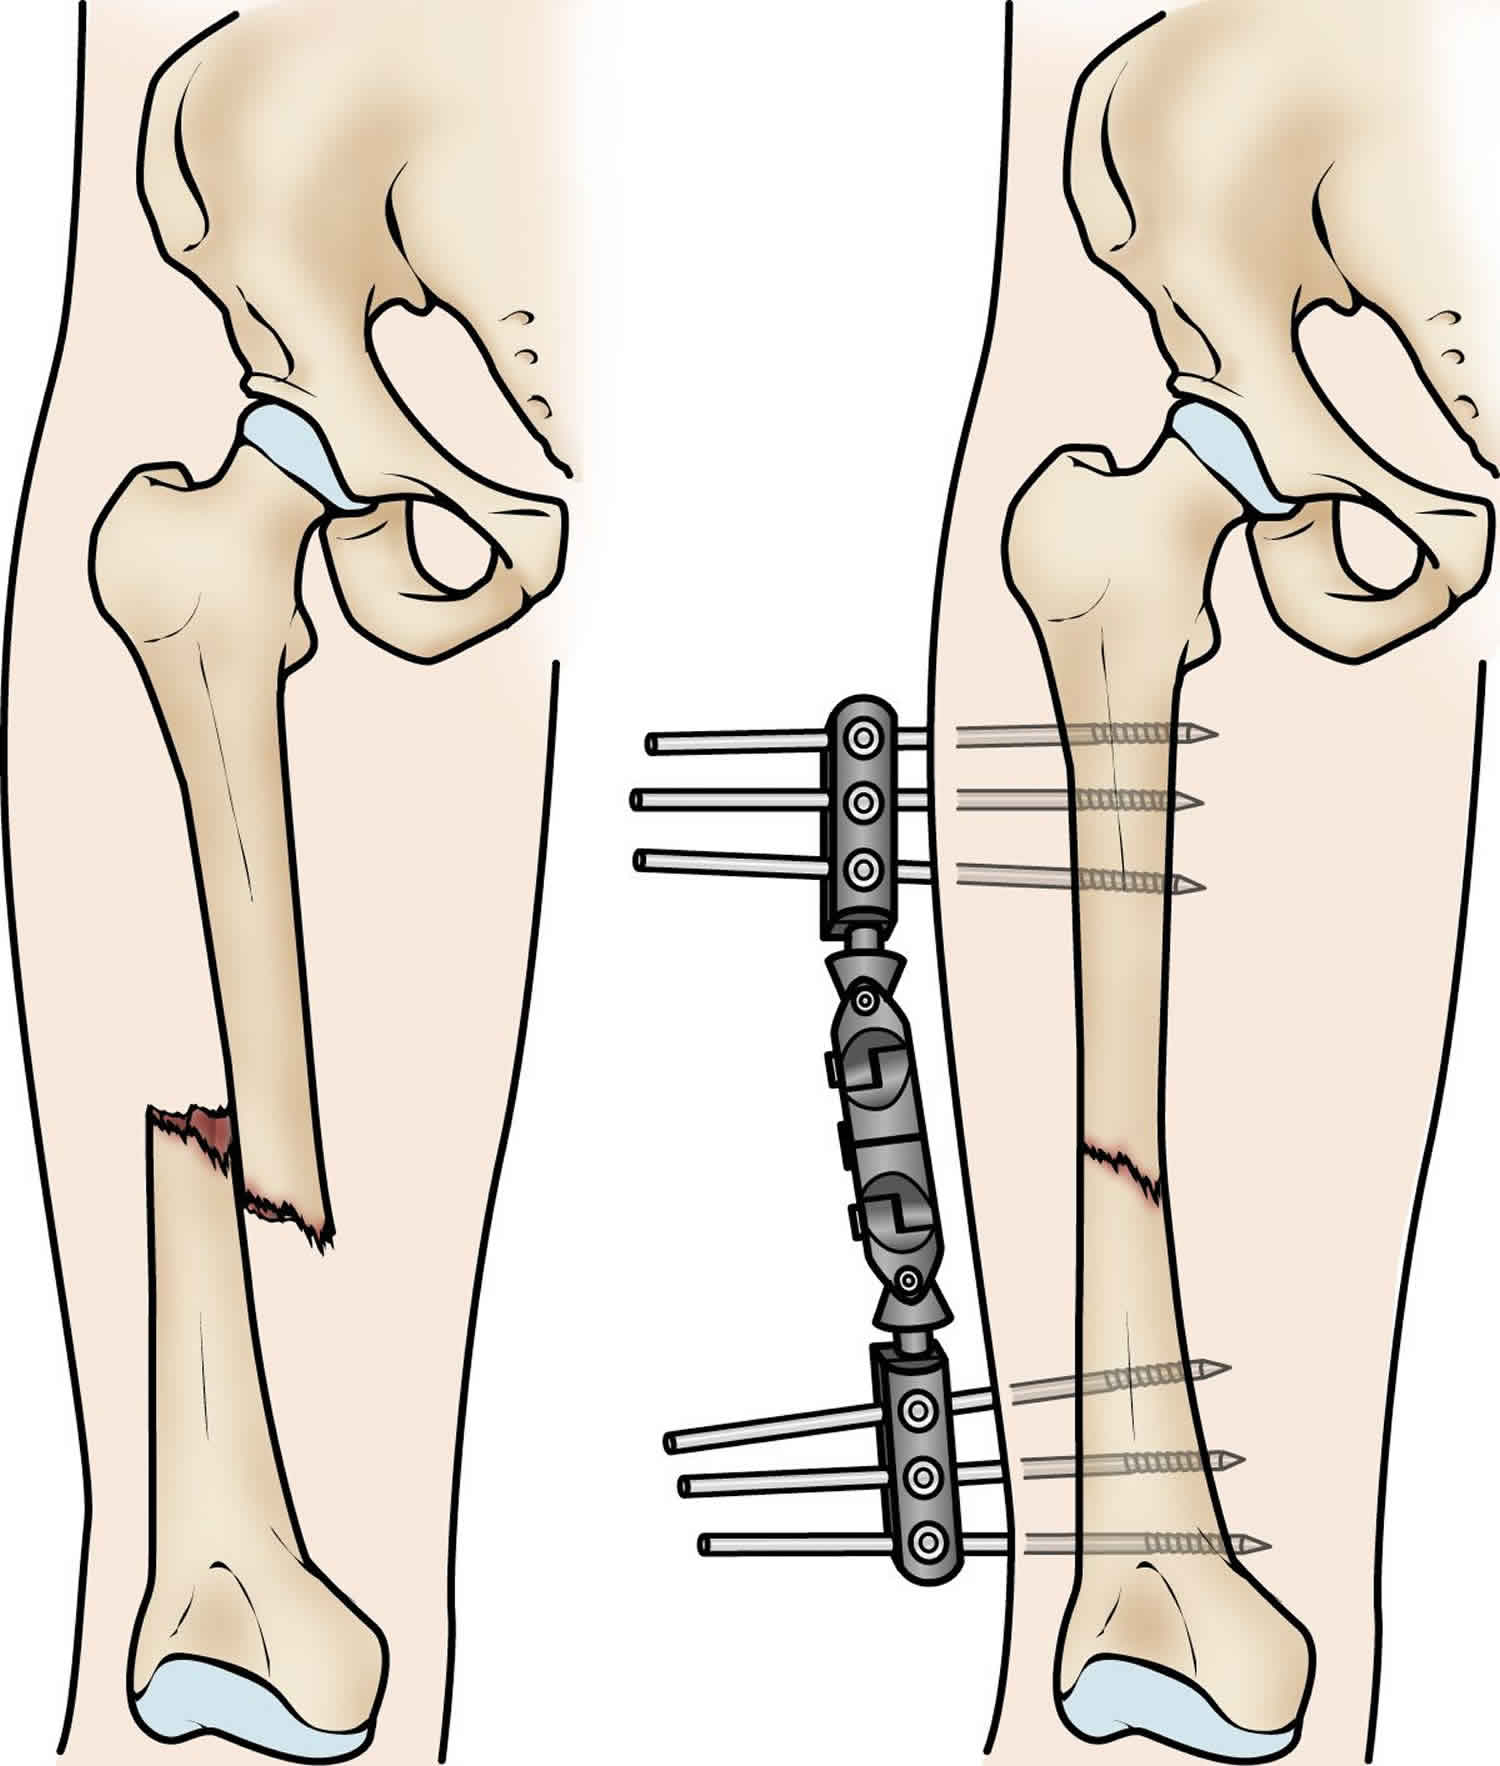 How Does The Femur Breaker Work Transverse fracture & transverse process fracture causes & treatment